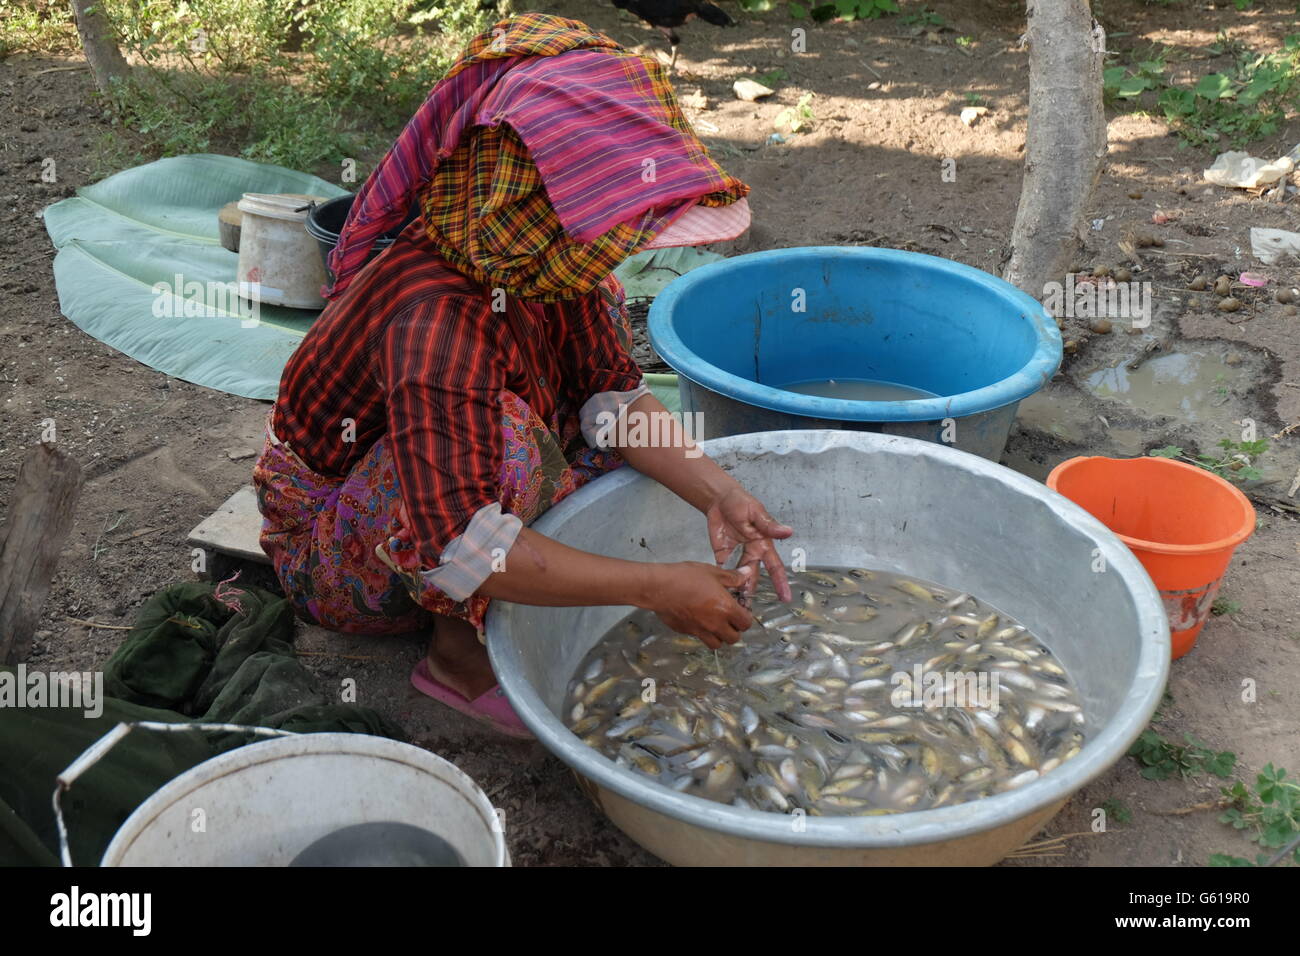 Preparing fish for supper in a Cambodian village Stock Photo